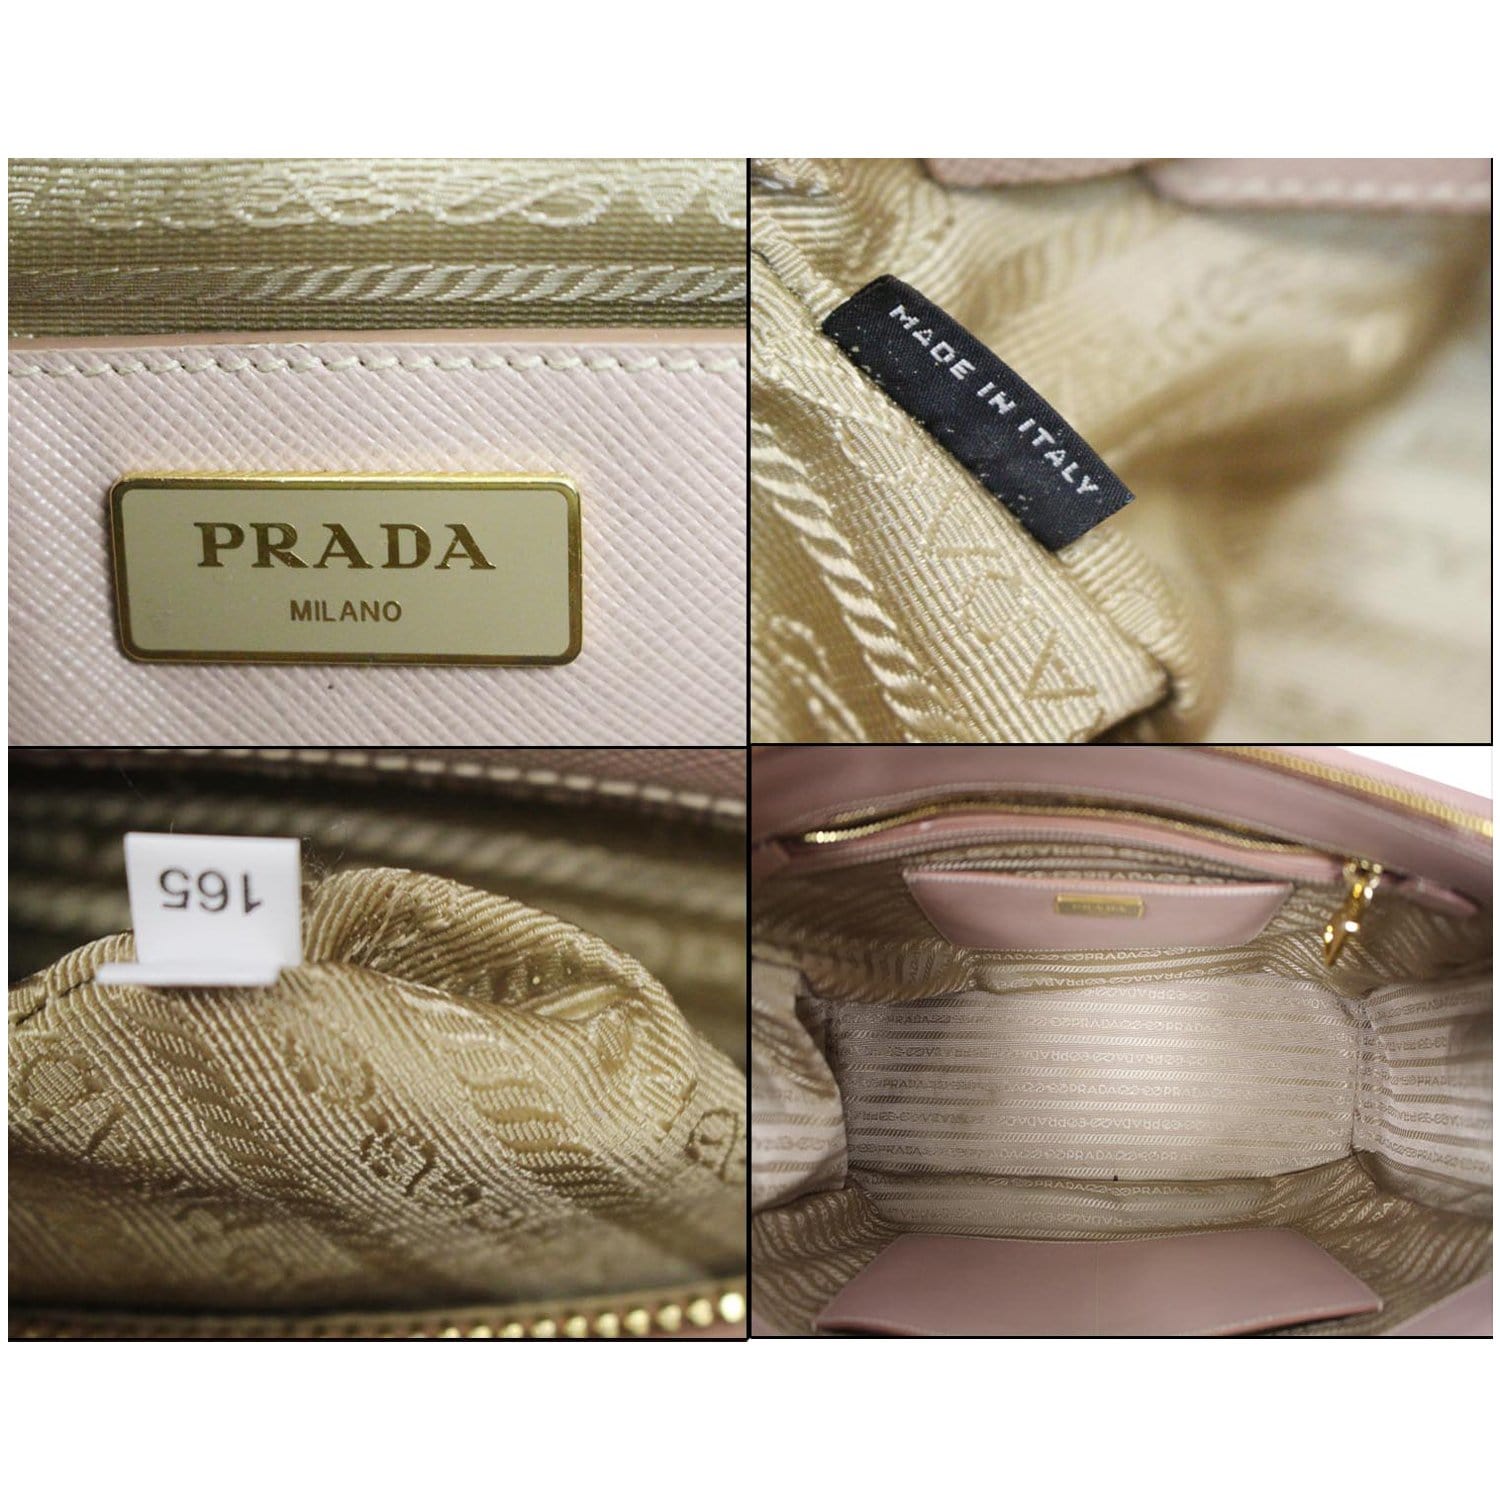 Prada Pink Saffiano Lux Leather Large Galleria Tote at 1stDibs